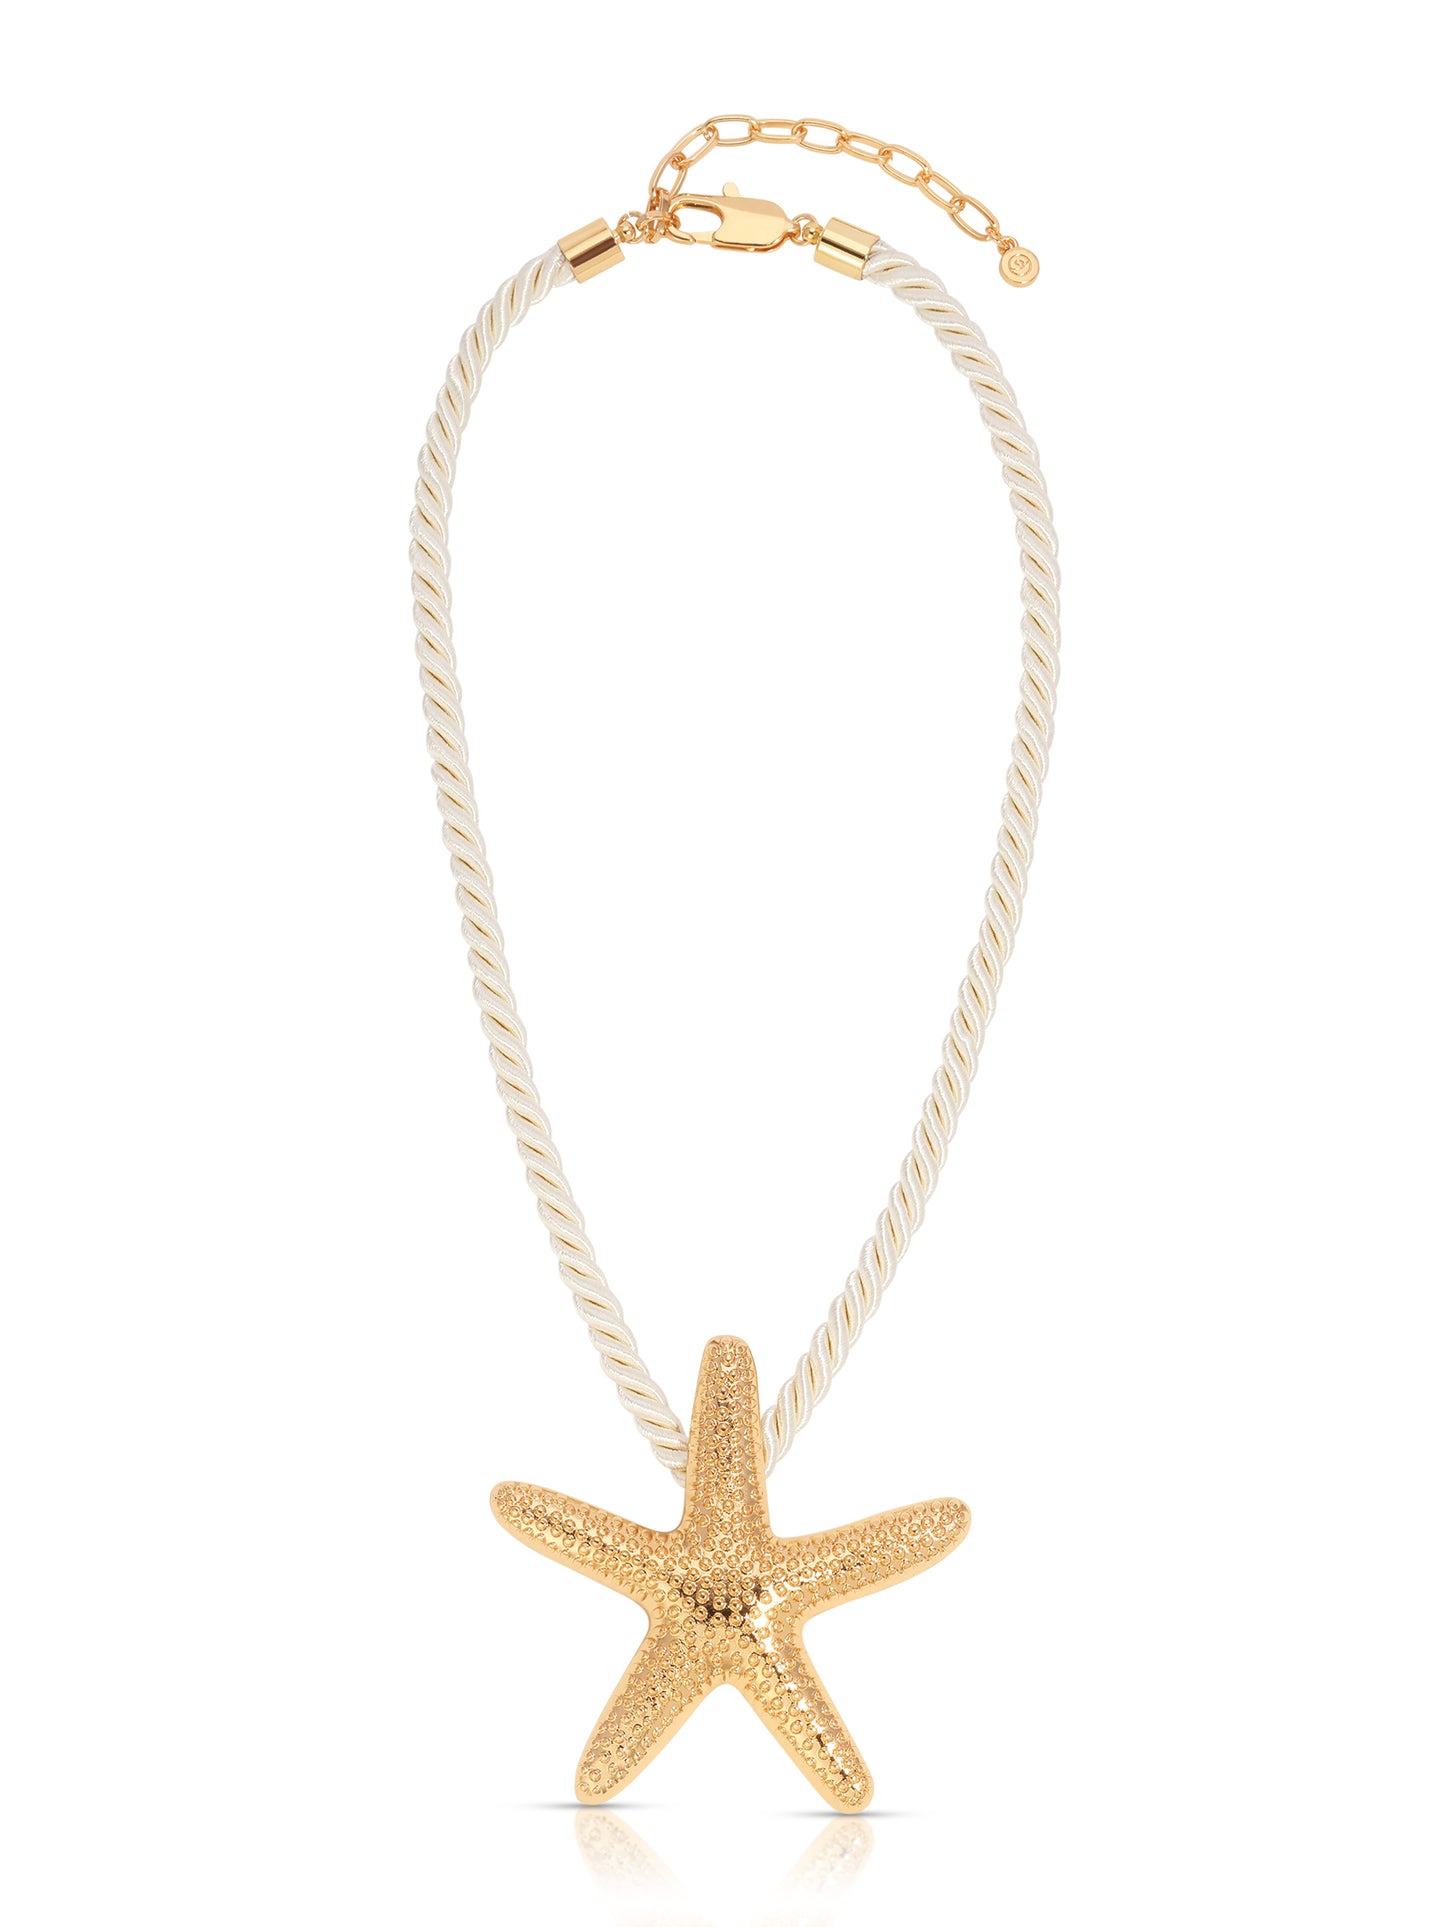 Starfish Statement Pendant Necklace full view